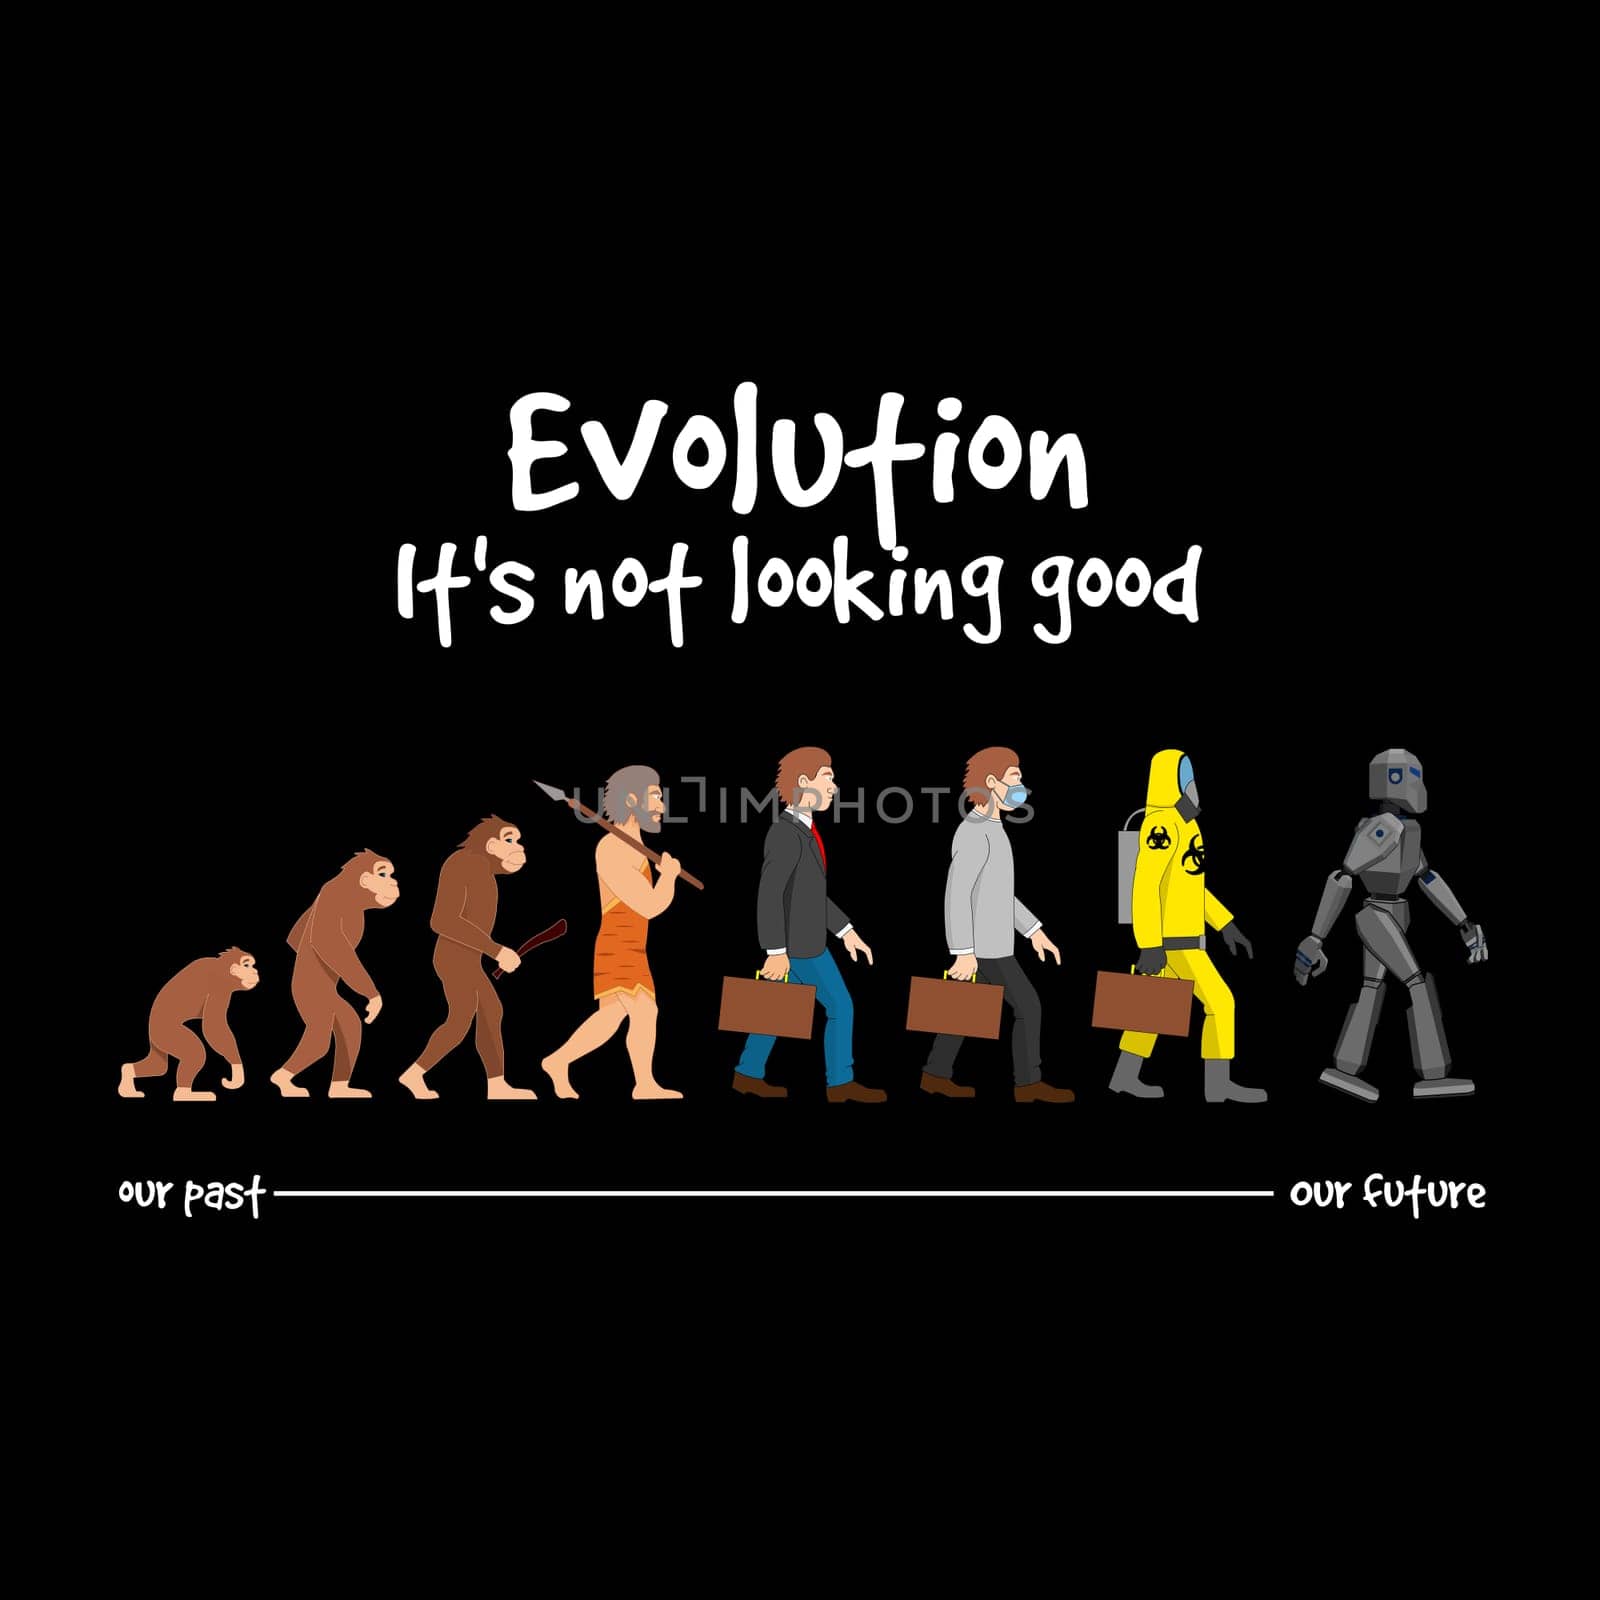 A funny human evolution timeline from times of monkey to future of robot men with the text "it's not looking good".above.